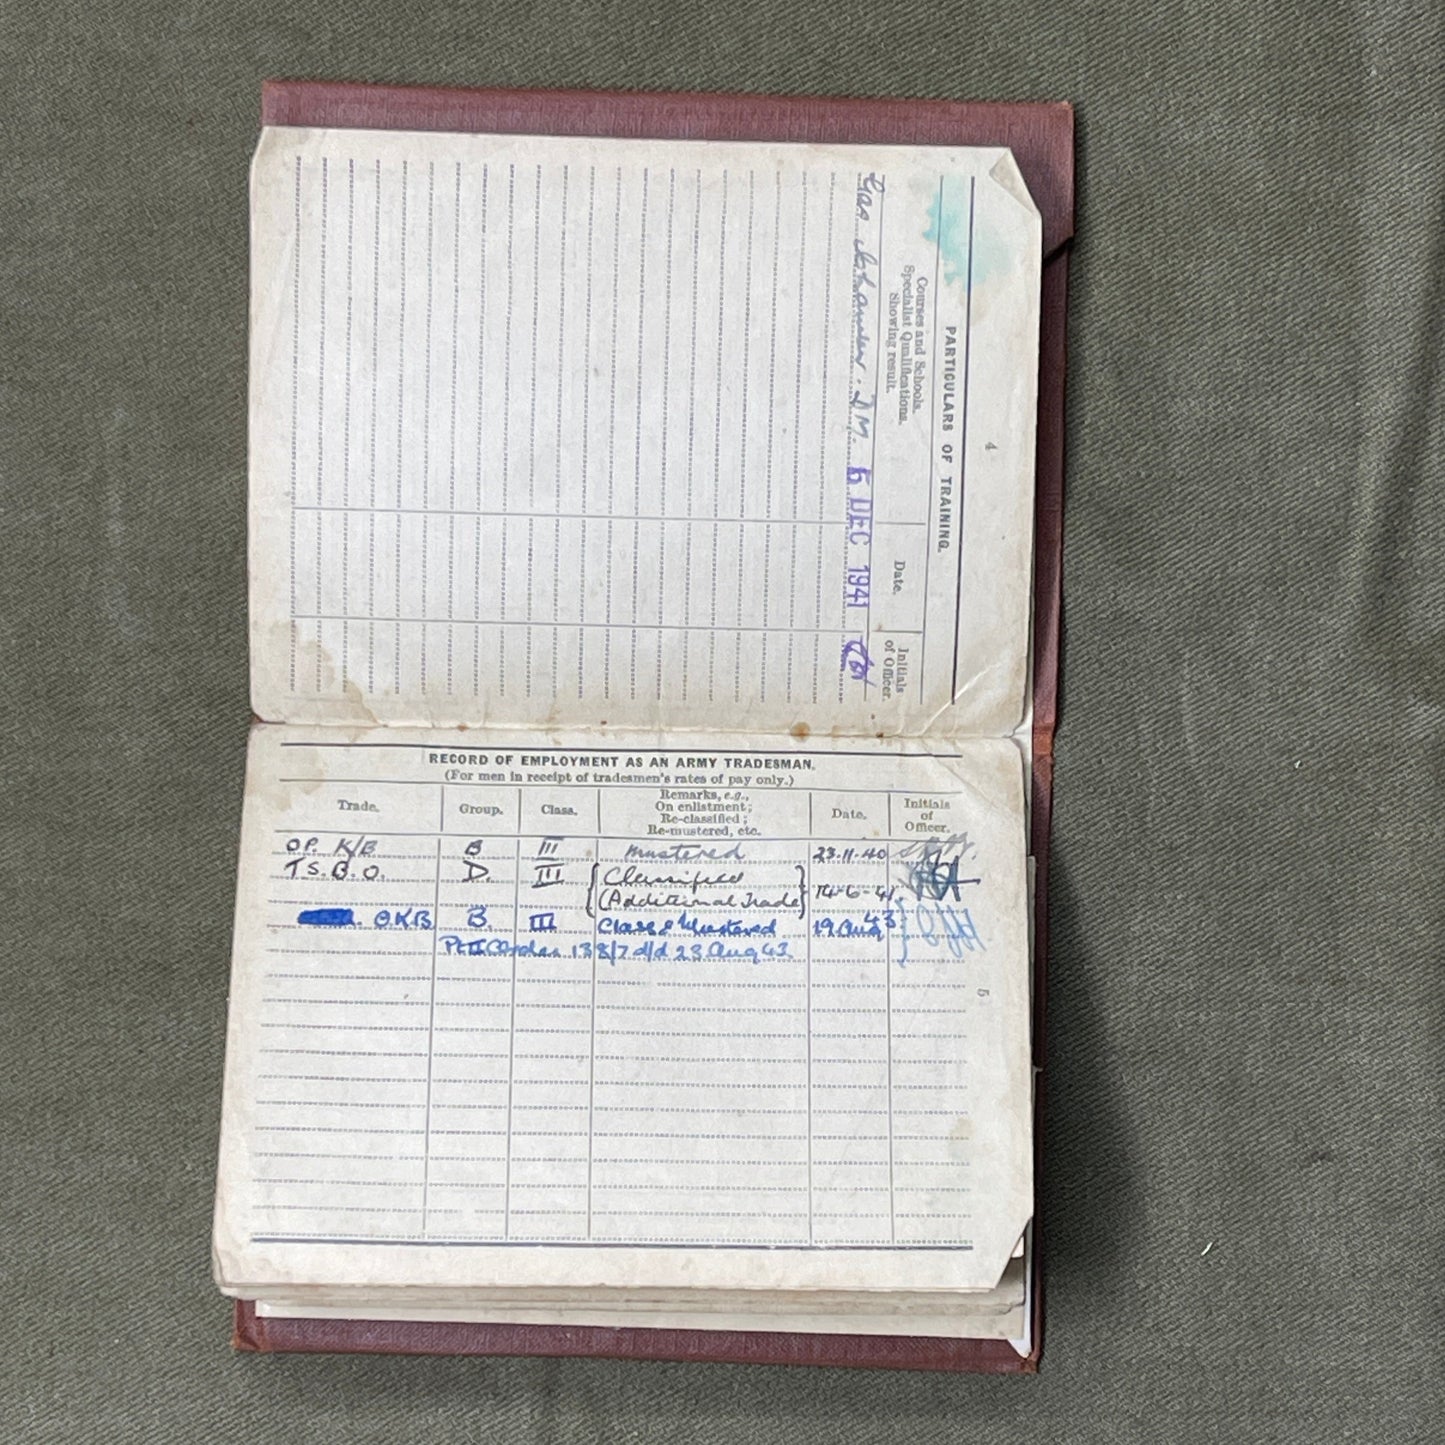 A really interesting selection of original WW2 Service paperwork relating to Arthur Charles CARTWRIGHTwho served in the Royal Signals his service records show that he was a Signals OP. K/B Group B and a TS.BO. Class D